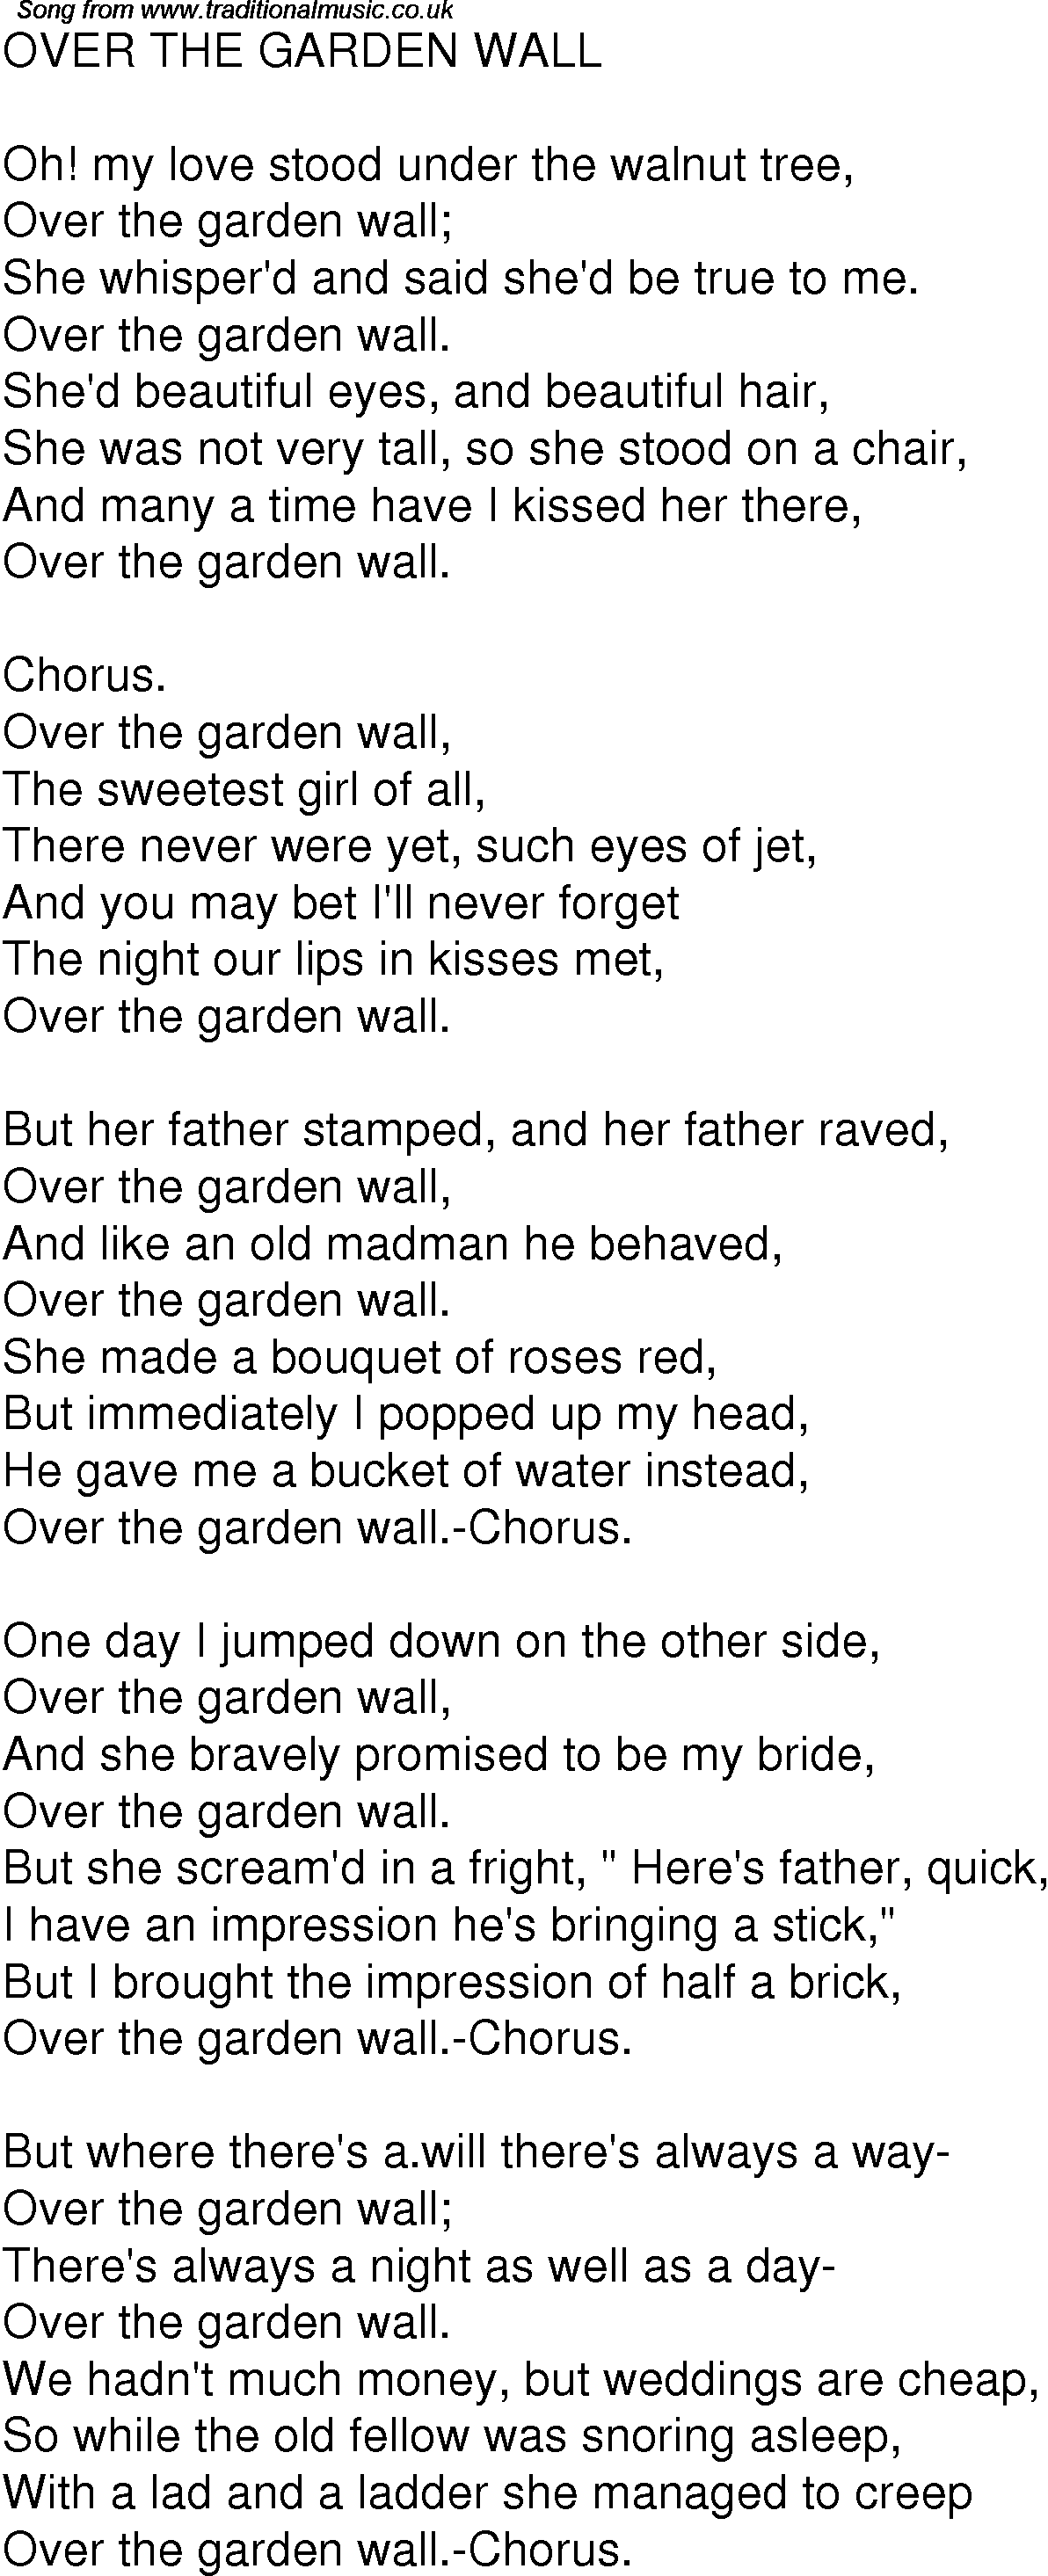 Old Time Song Lyrics For 01 Over The Garden Wall